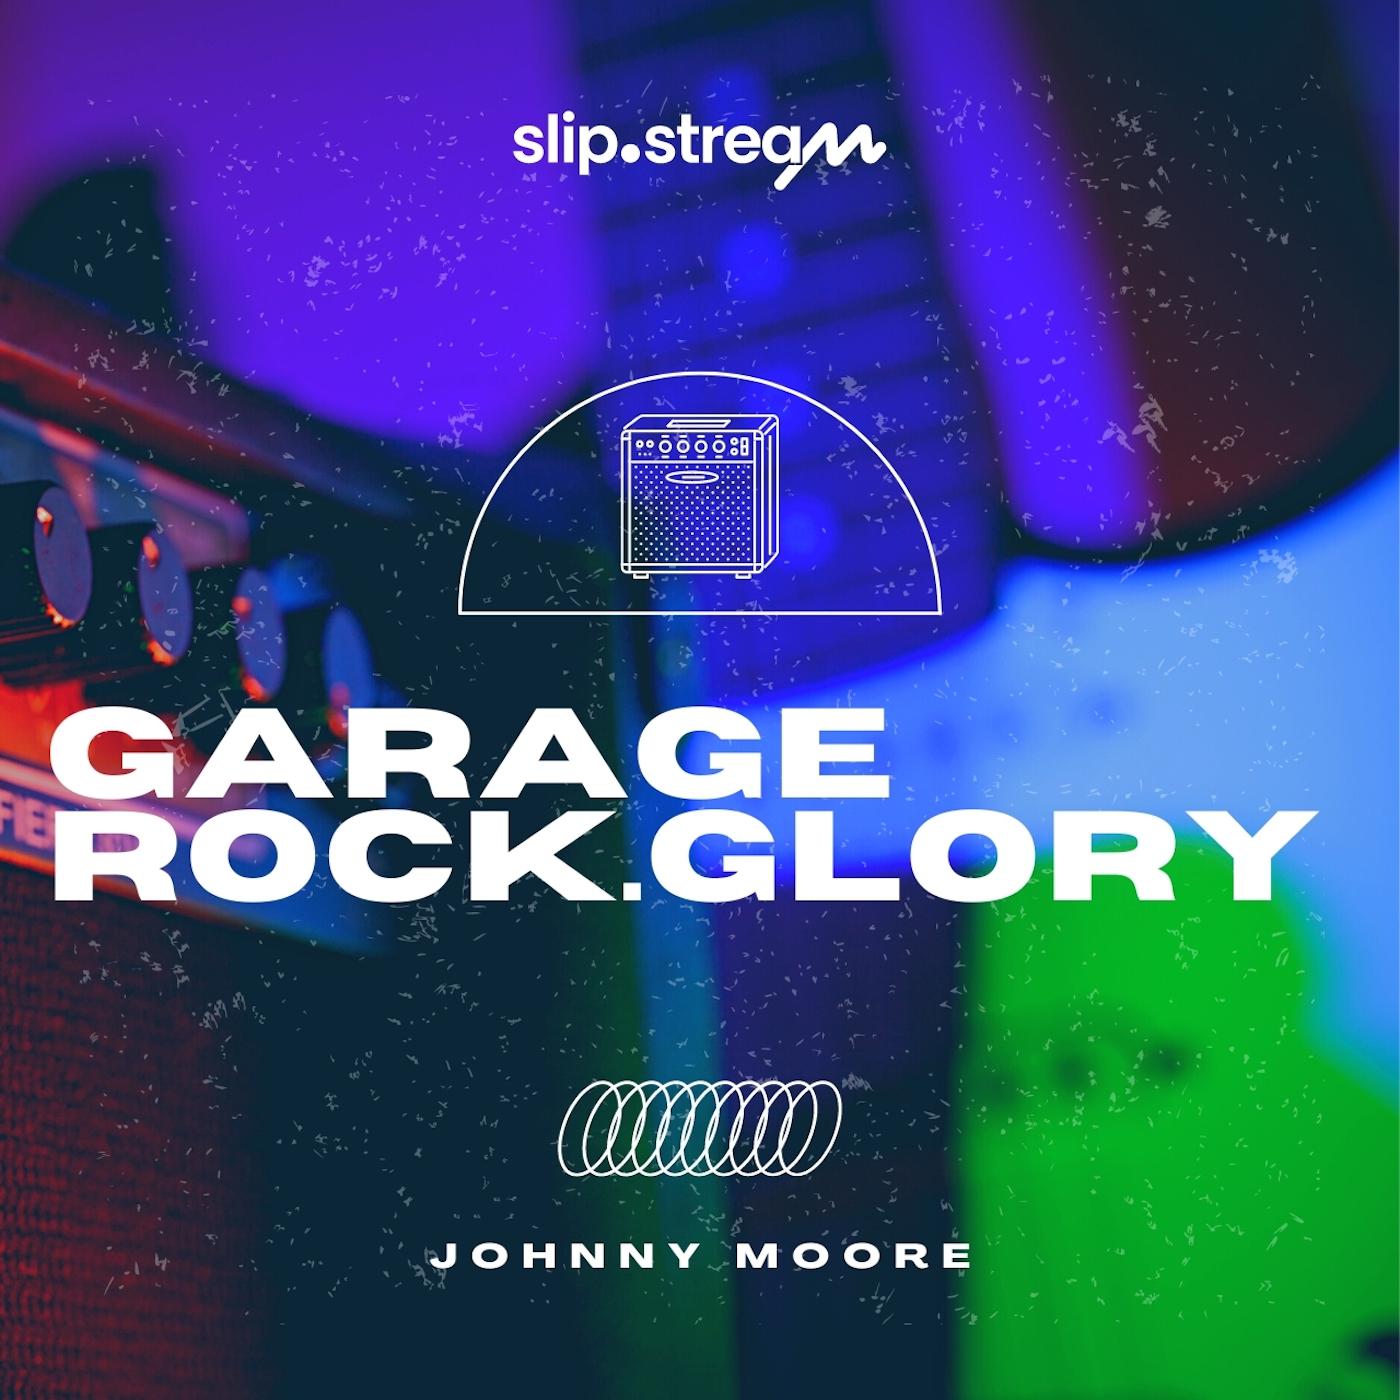 Johnny Moore - Guard Your Back